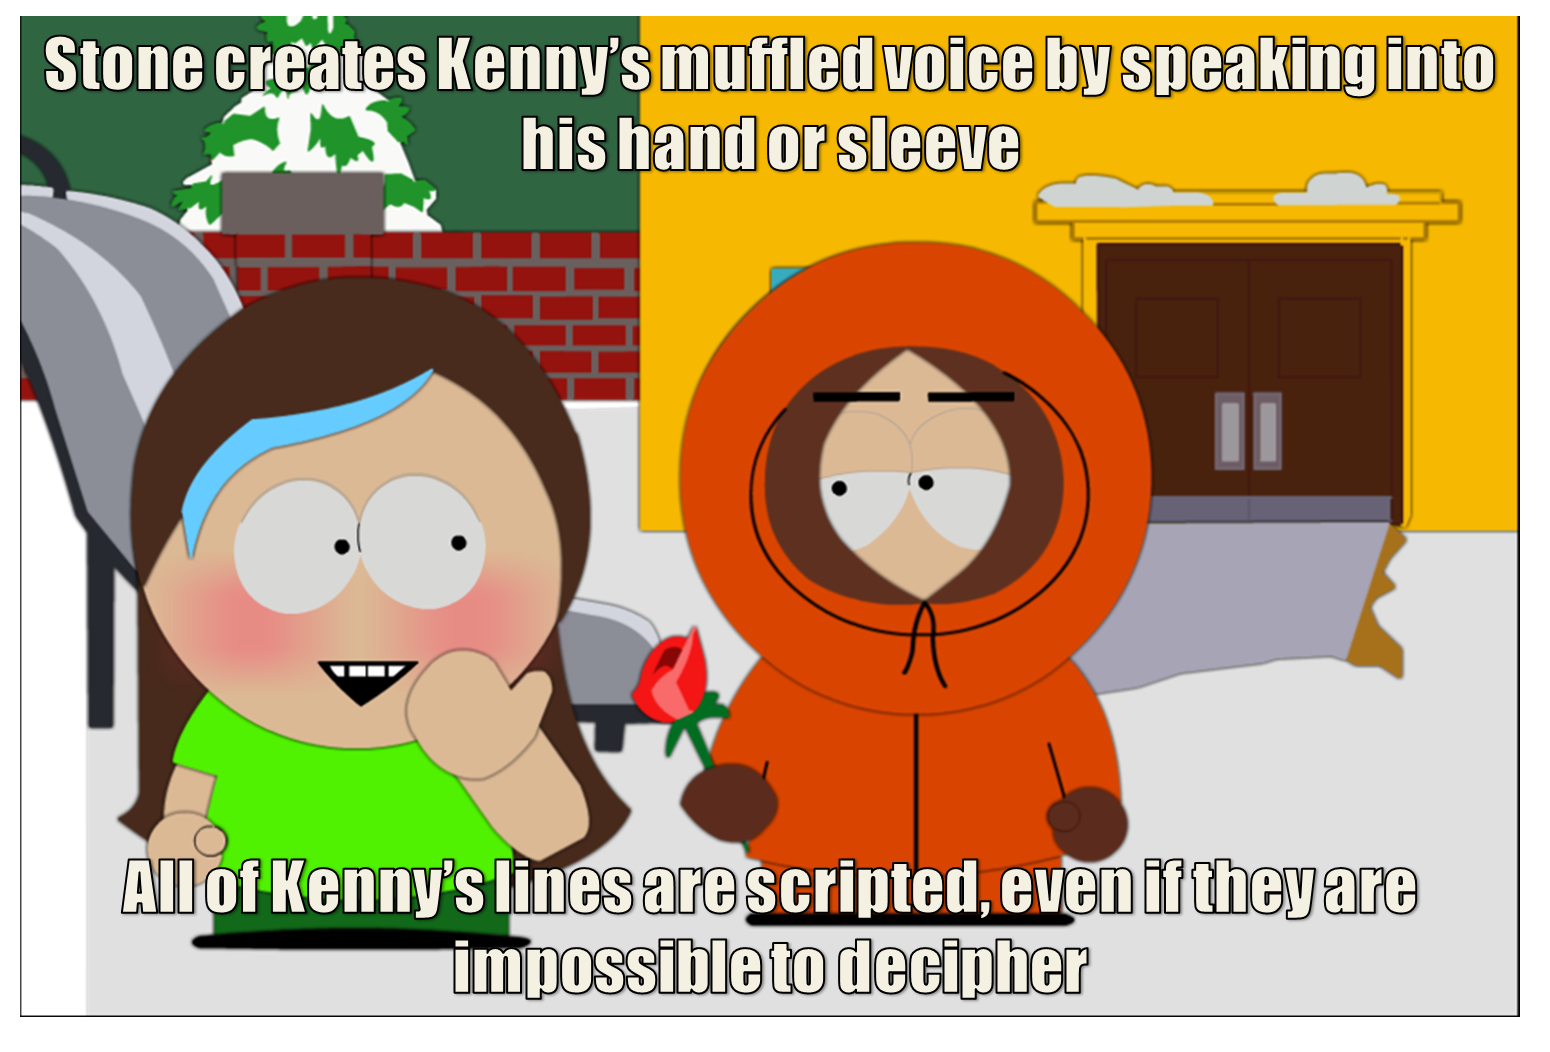 19 More Cool South Park Facts